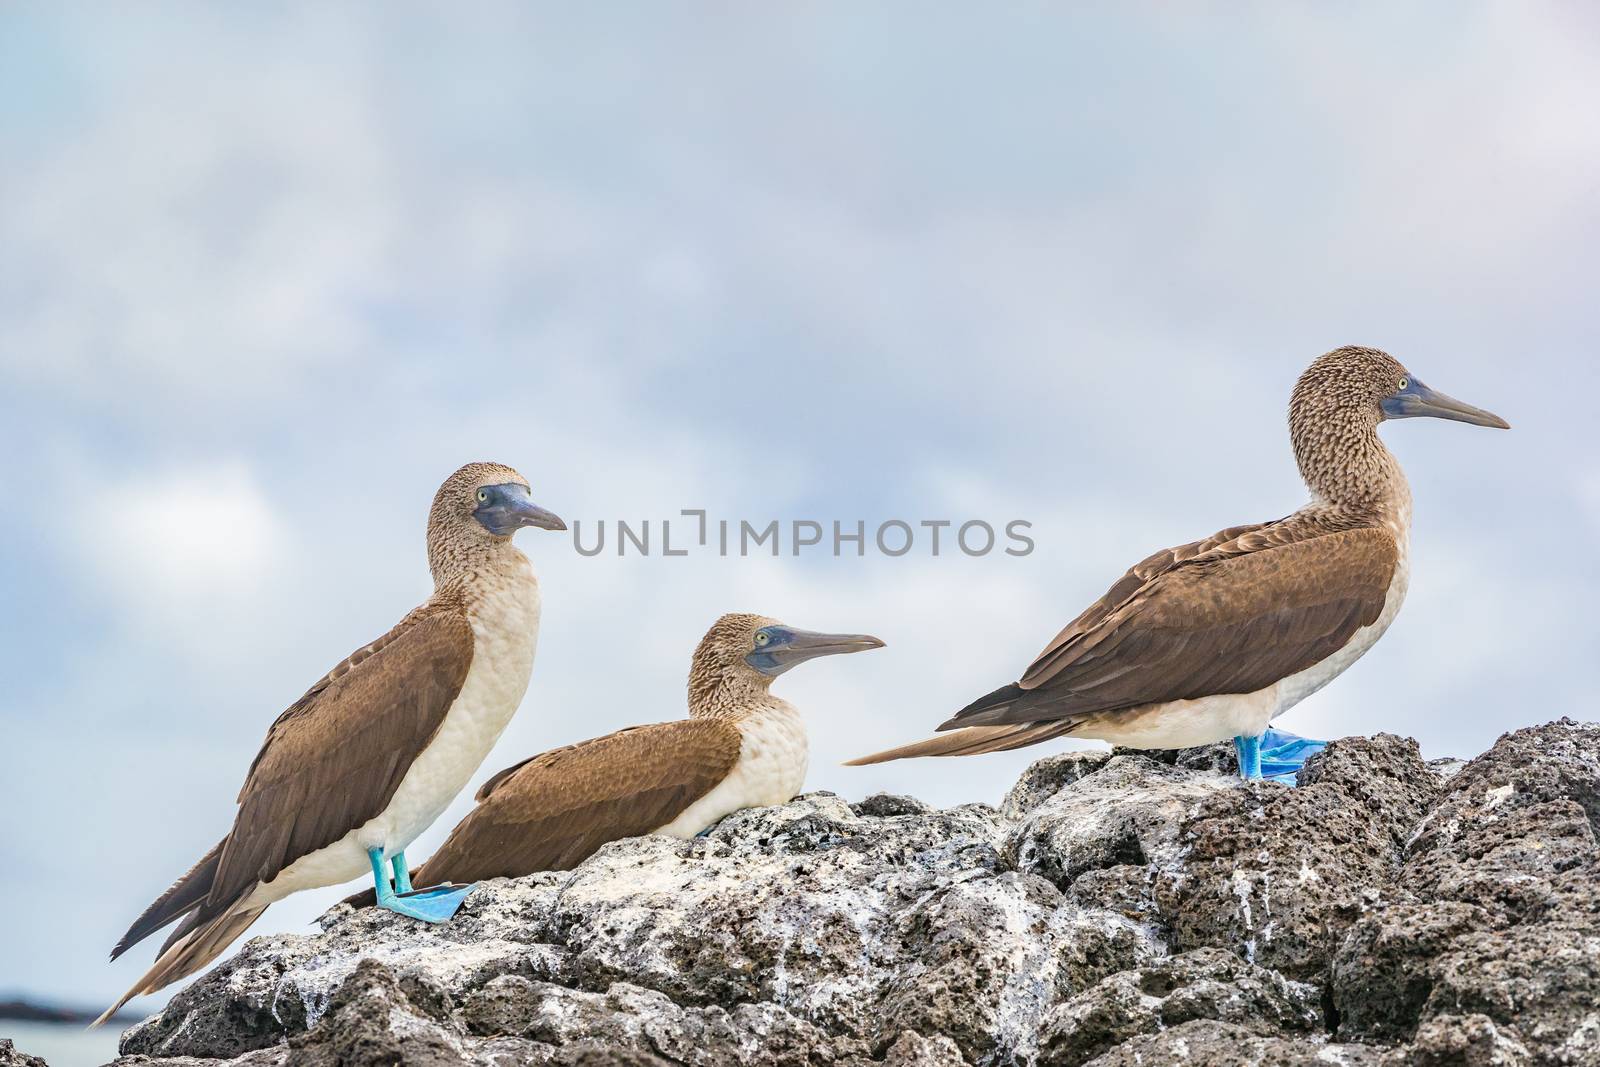 Blue-footed boobies - Iconic and famous galapagos animals and wildlife. The Blue footed Booby are native to the Galapagos Islands, Ecuador, South America.